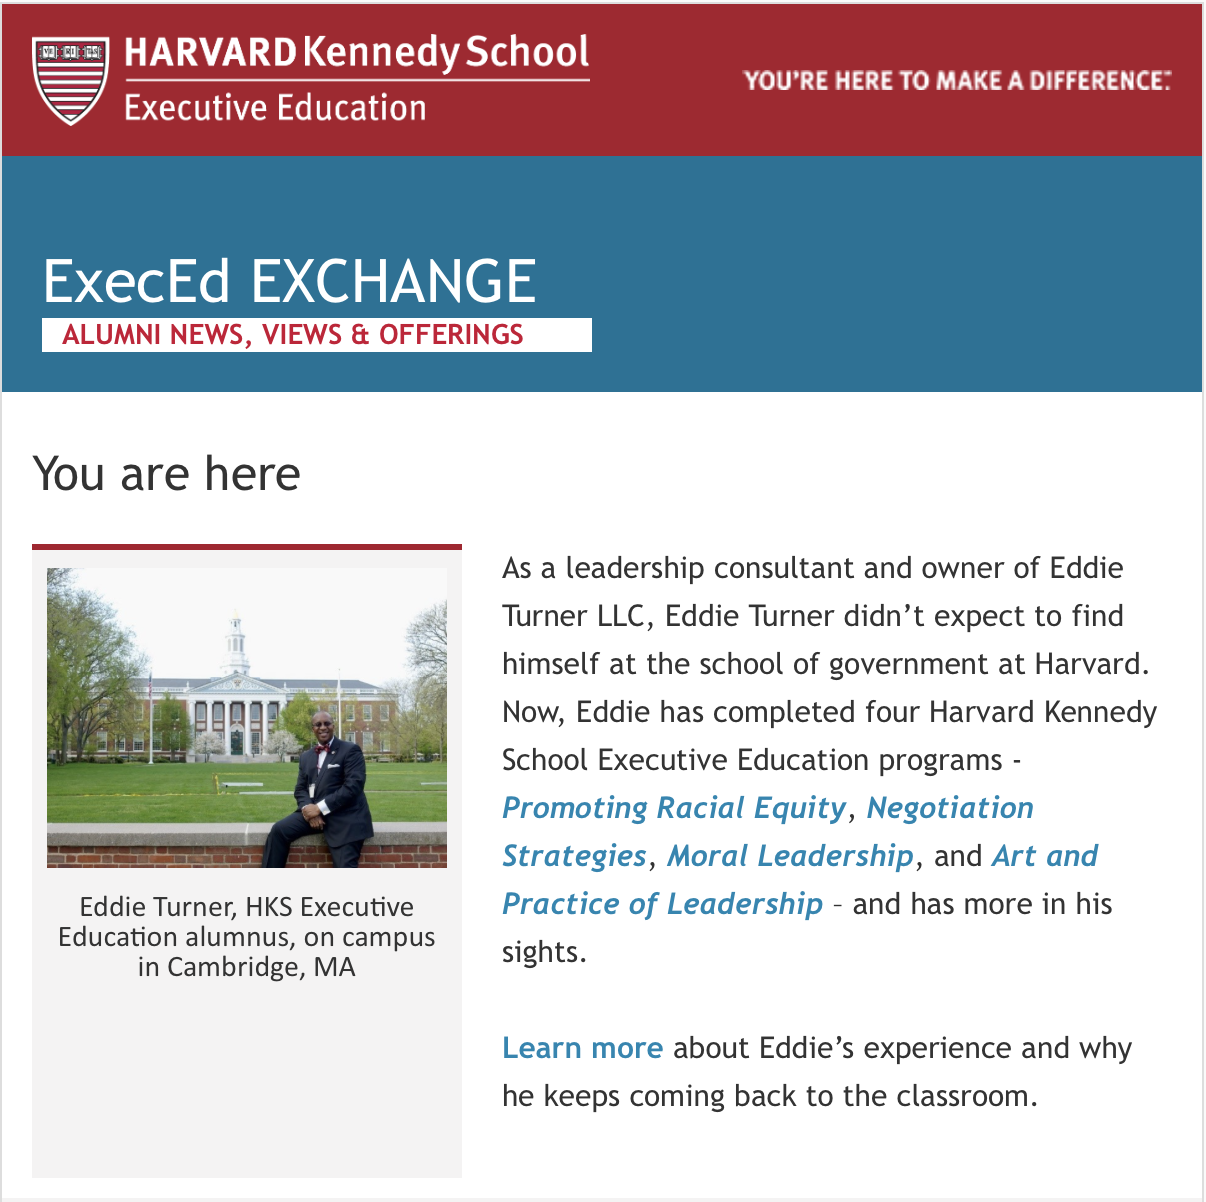 Eddie Turner Reflects on his HKS Executive Education Experience